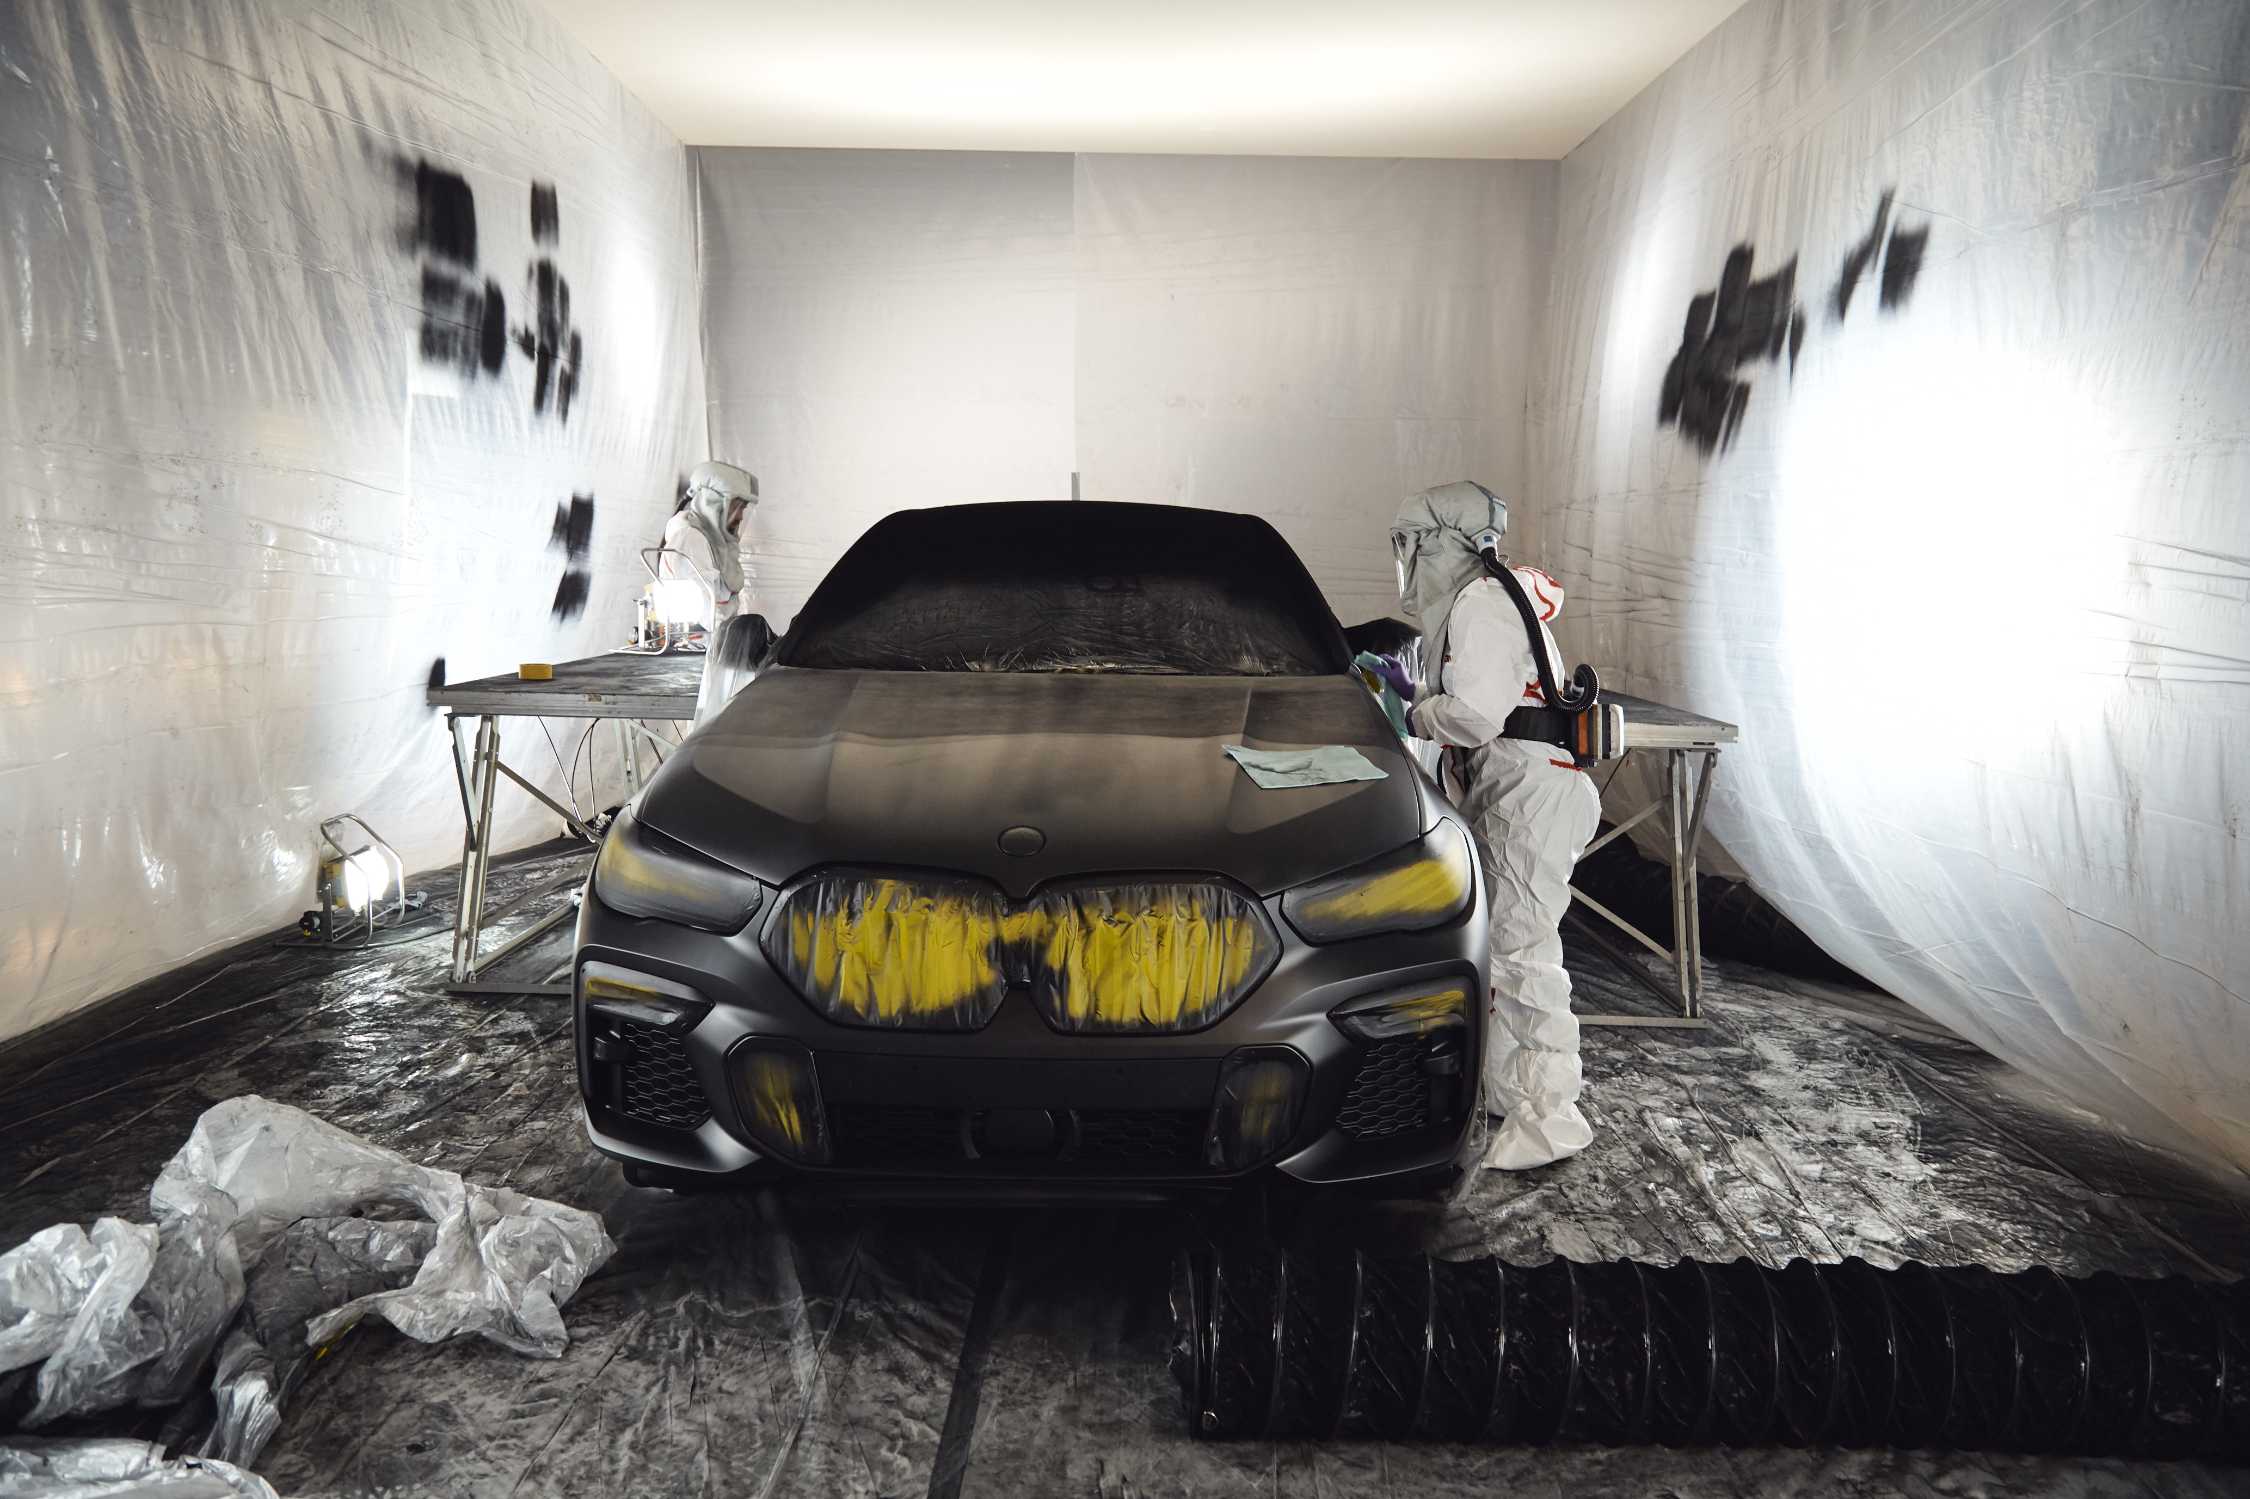 The BMW Vantablack X6 – Making of pictures (08/2019).